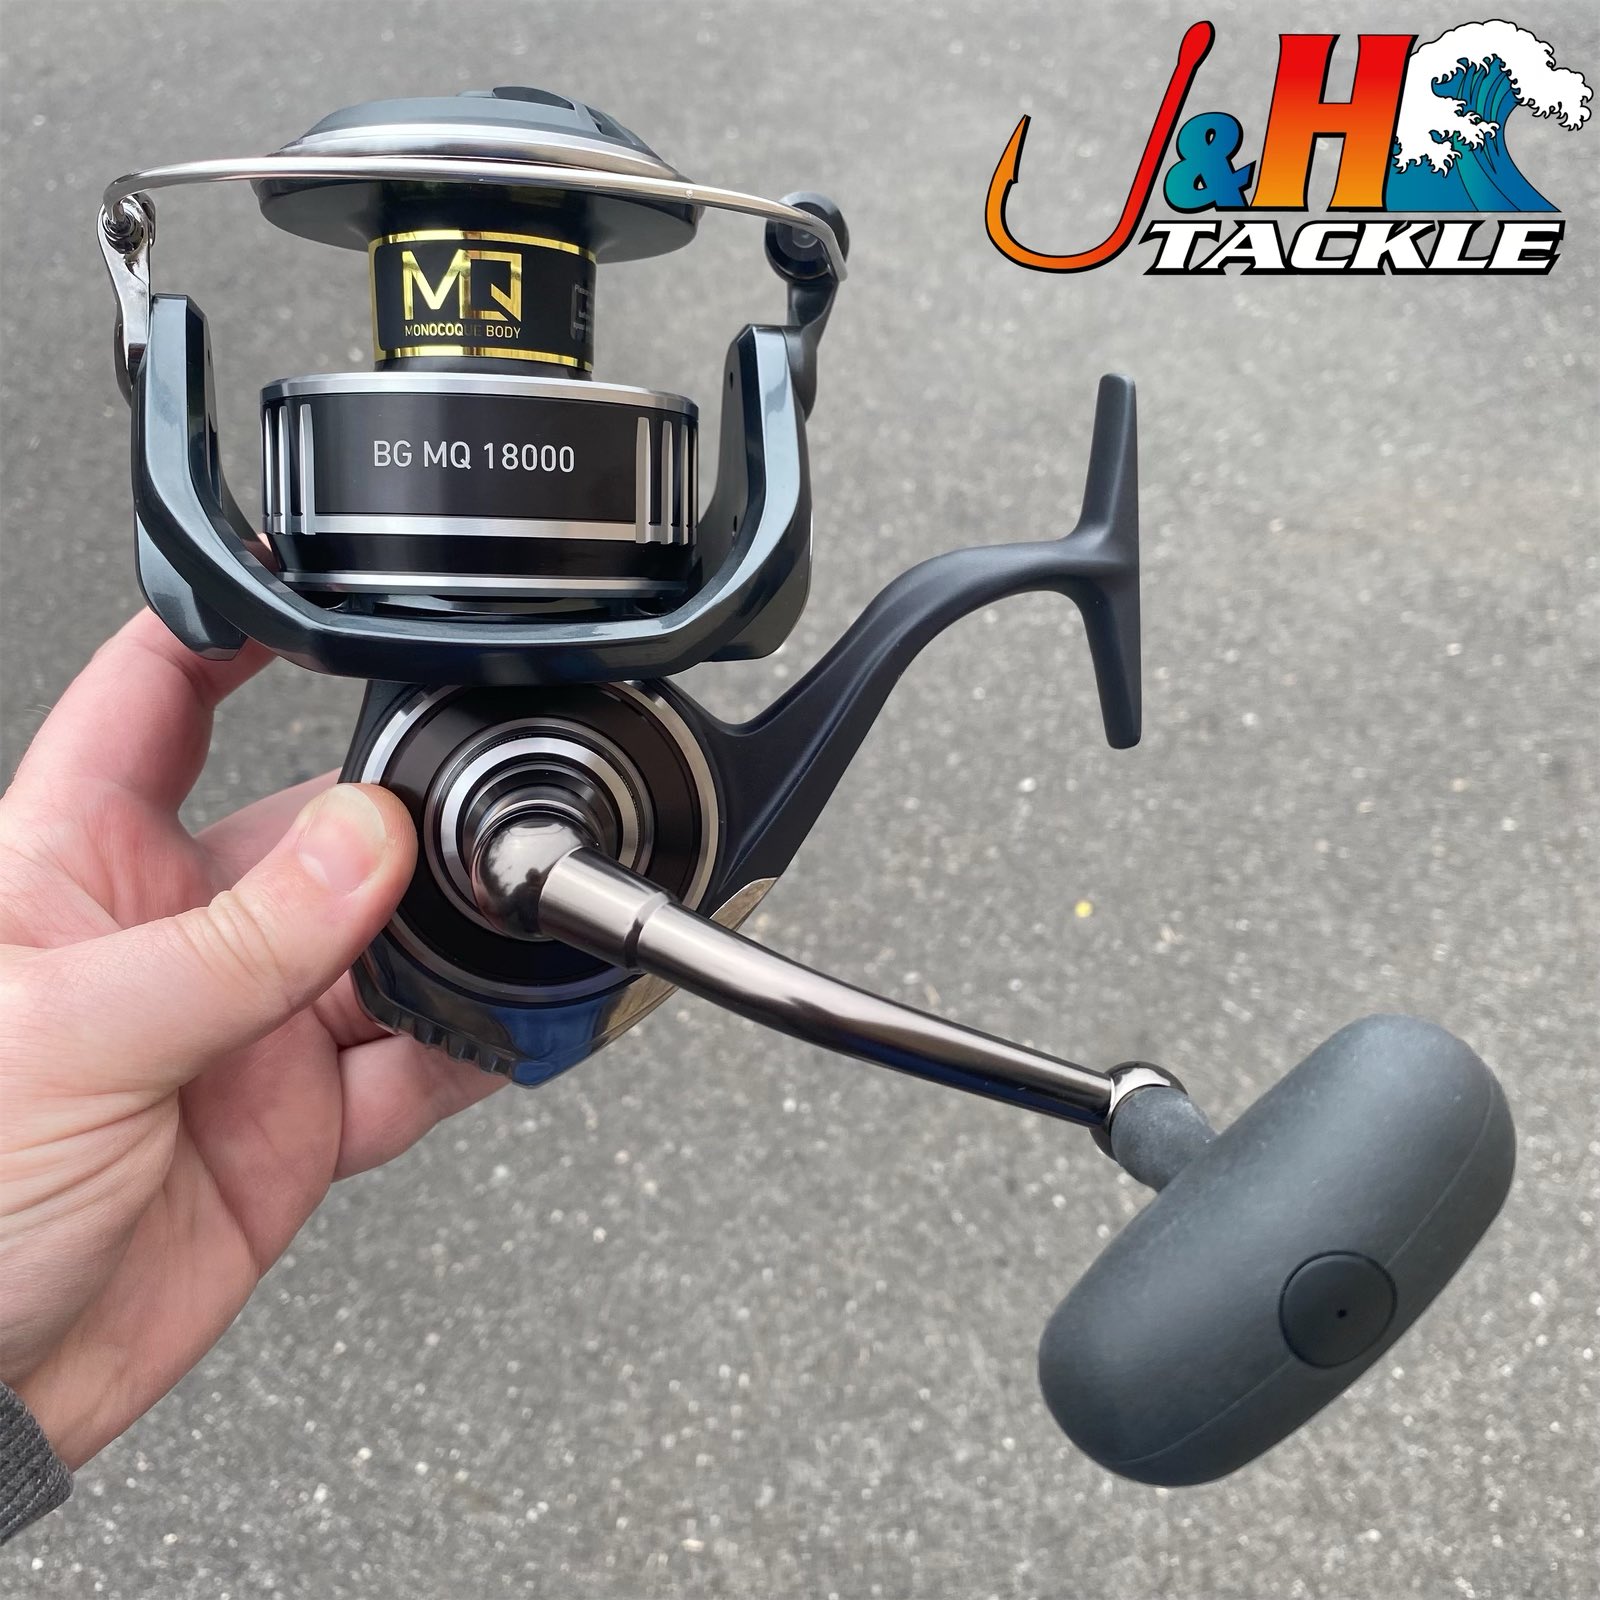 J&H Tackle on X: Daiwa BG MQ 18000 Spinning Reels are in stock for your  tuna popping pleasure!  #jandhtackle #fishing  #tunafishing #tunapopping #longislandfishing #njfishing #thetugisthedrug  #tugisthedrug #floridafishing #daiwa